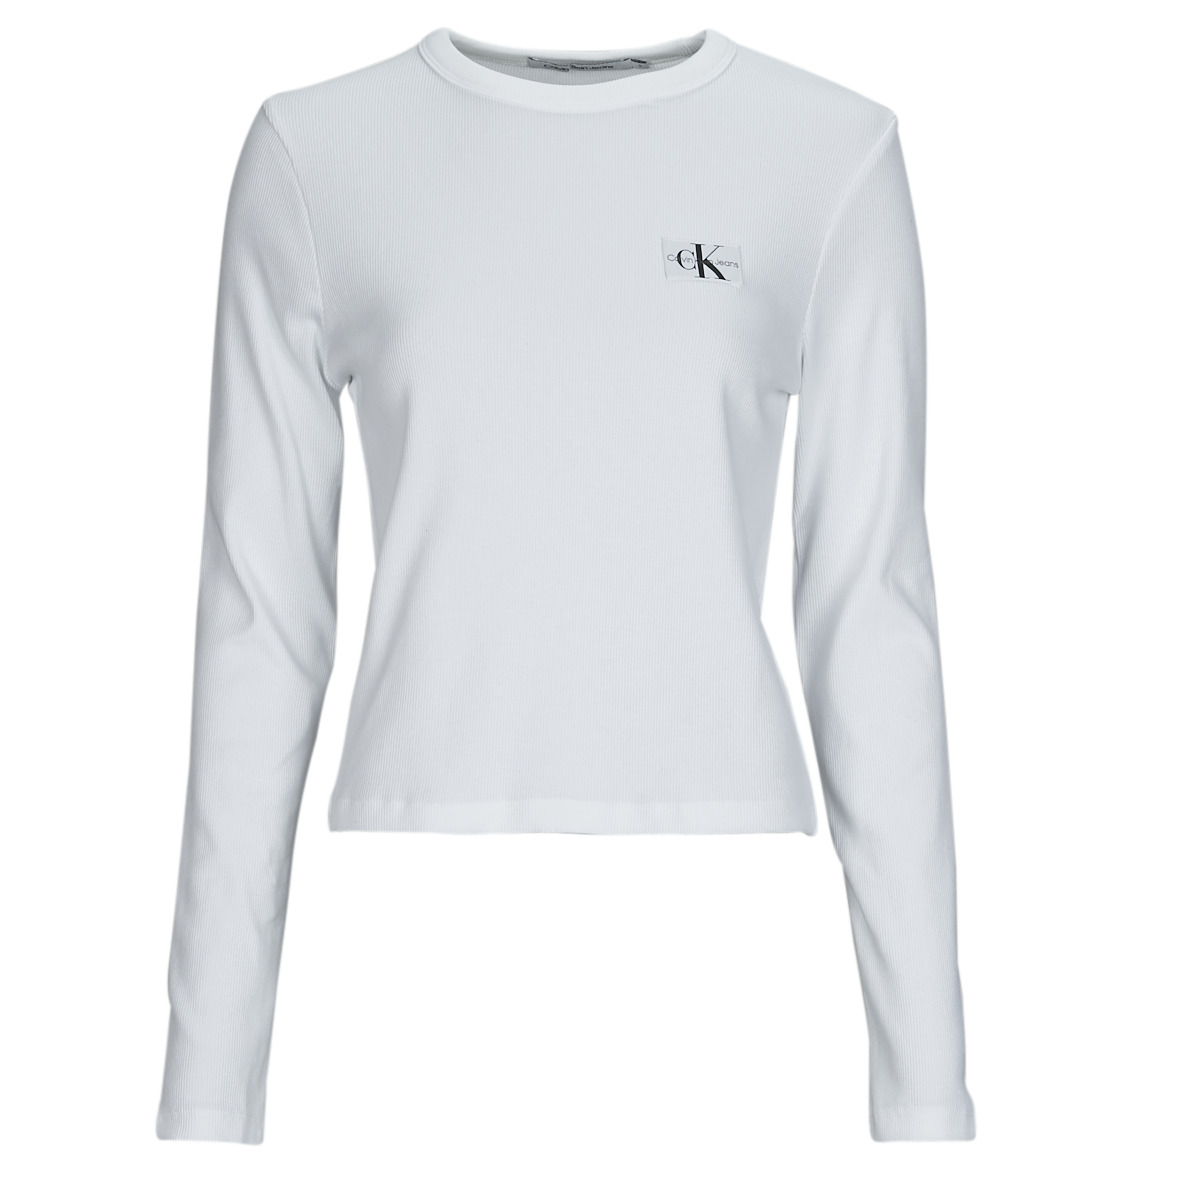 - Long Spartoo WOVEN White - Klein ! shirts Jeans RIB Calvin LONG sleeved Clothing SLEEVE LABEL delivery | Europe Women € 55,00 Fast